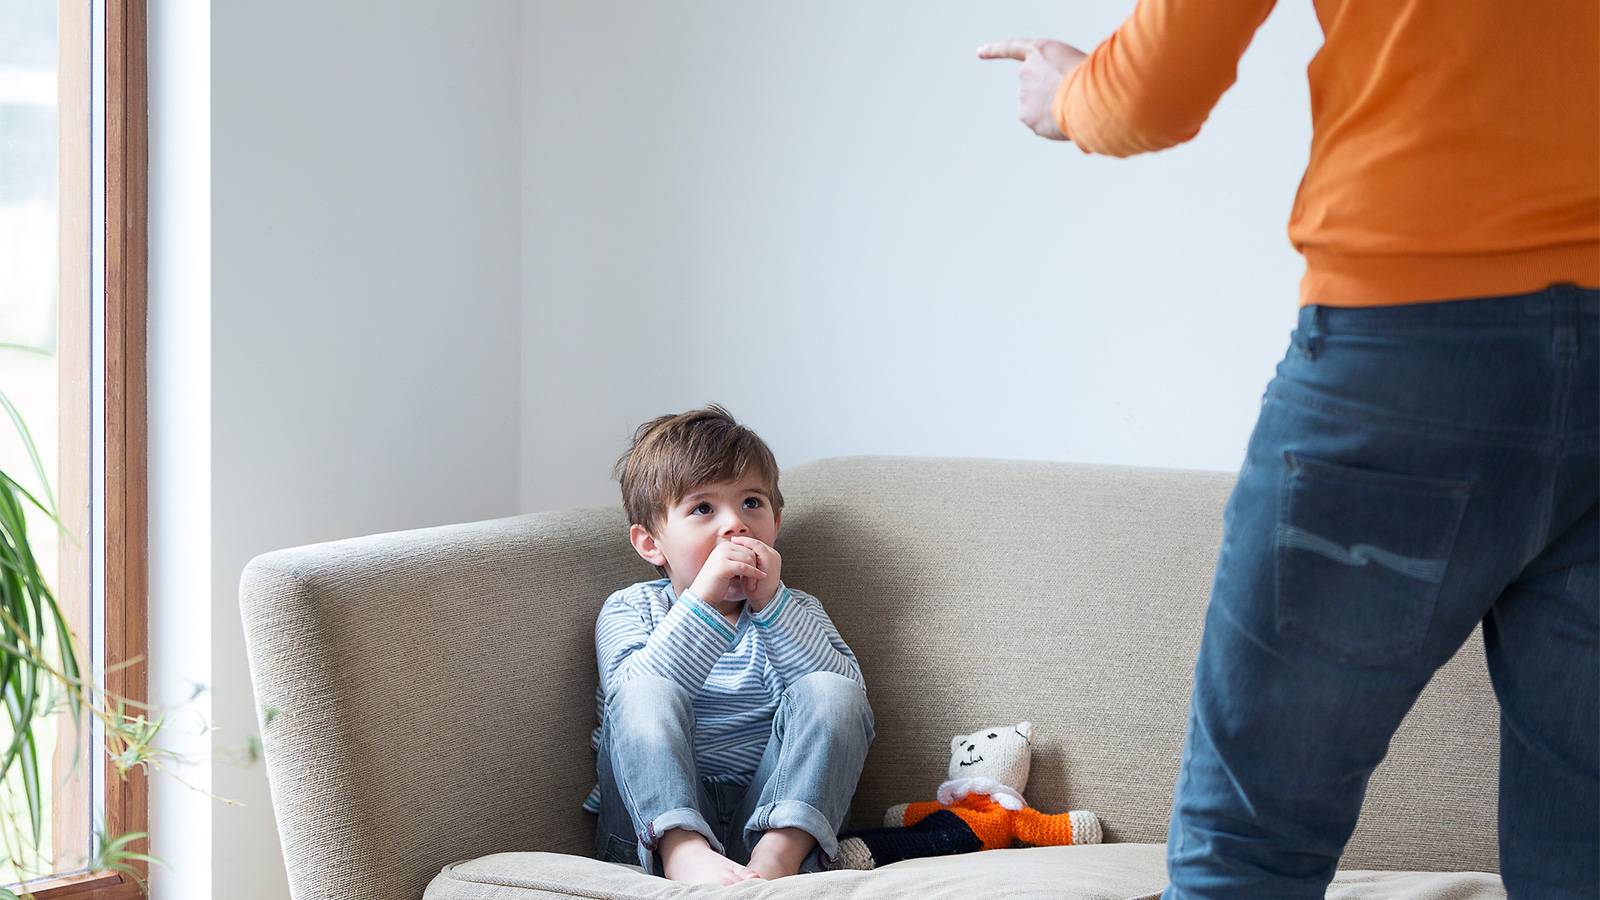 Tots--How-to-talk-to-your-kid-after-yelling-at-him-1